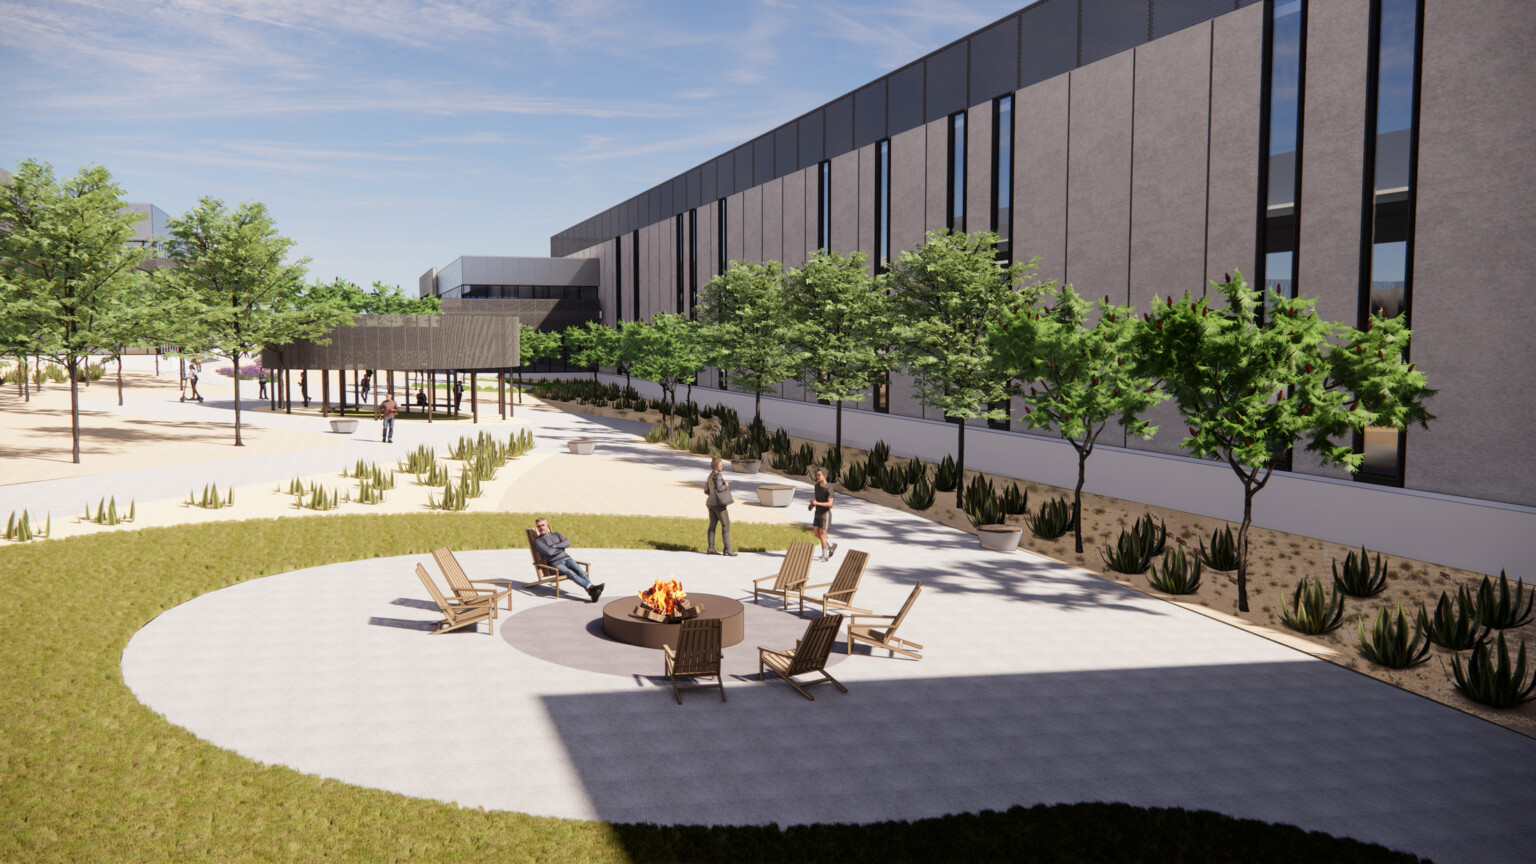 Outdoor amenities such as a fire pit with seating and walking trail around the exterior of data center building clad in prefabricated, concrete palette with linear window cutouts